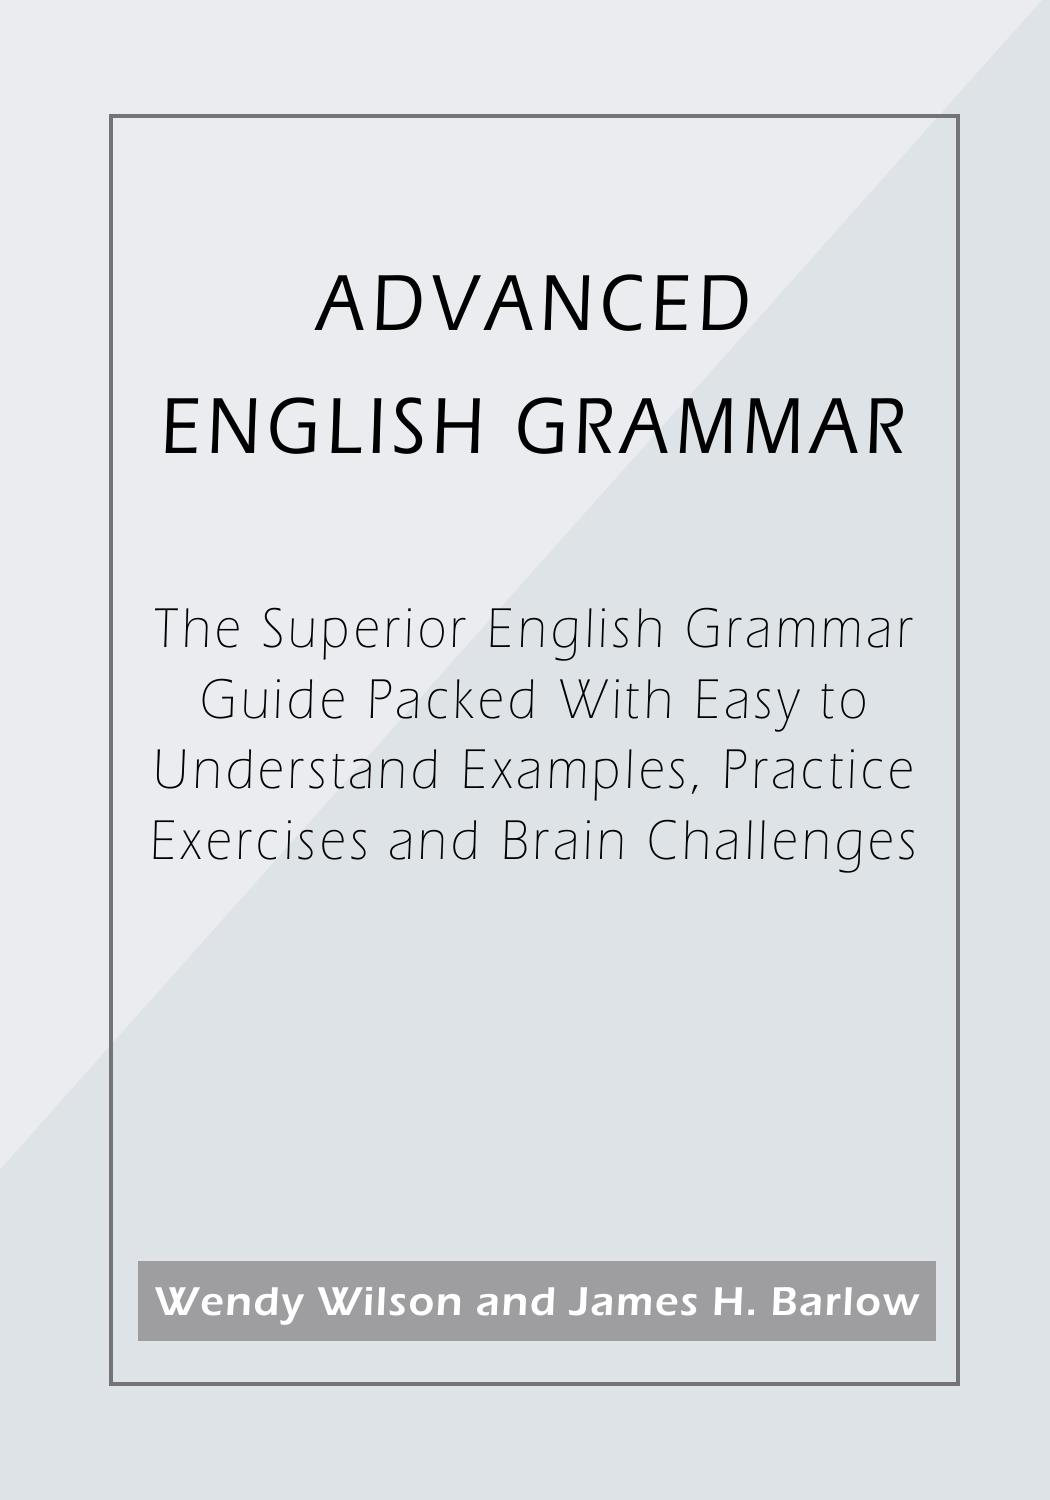 Advanced English Grammar The Superior English Grammar Guide Packed with Easy to Understand Examples, Practice Exercises and Brain Challenges